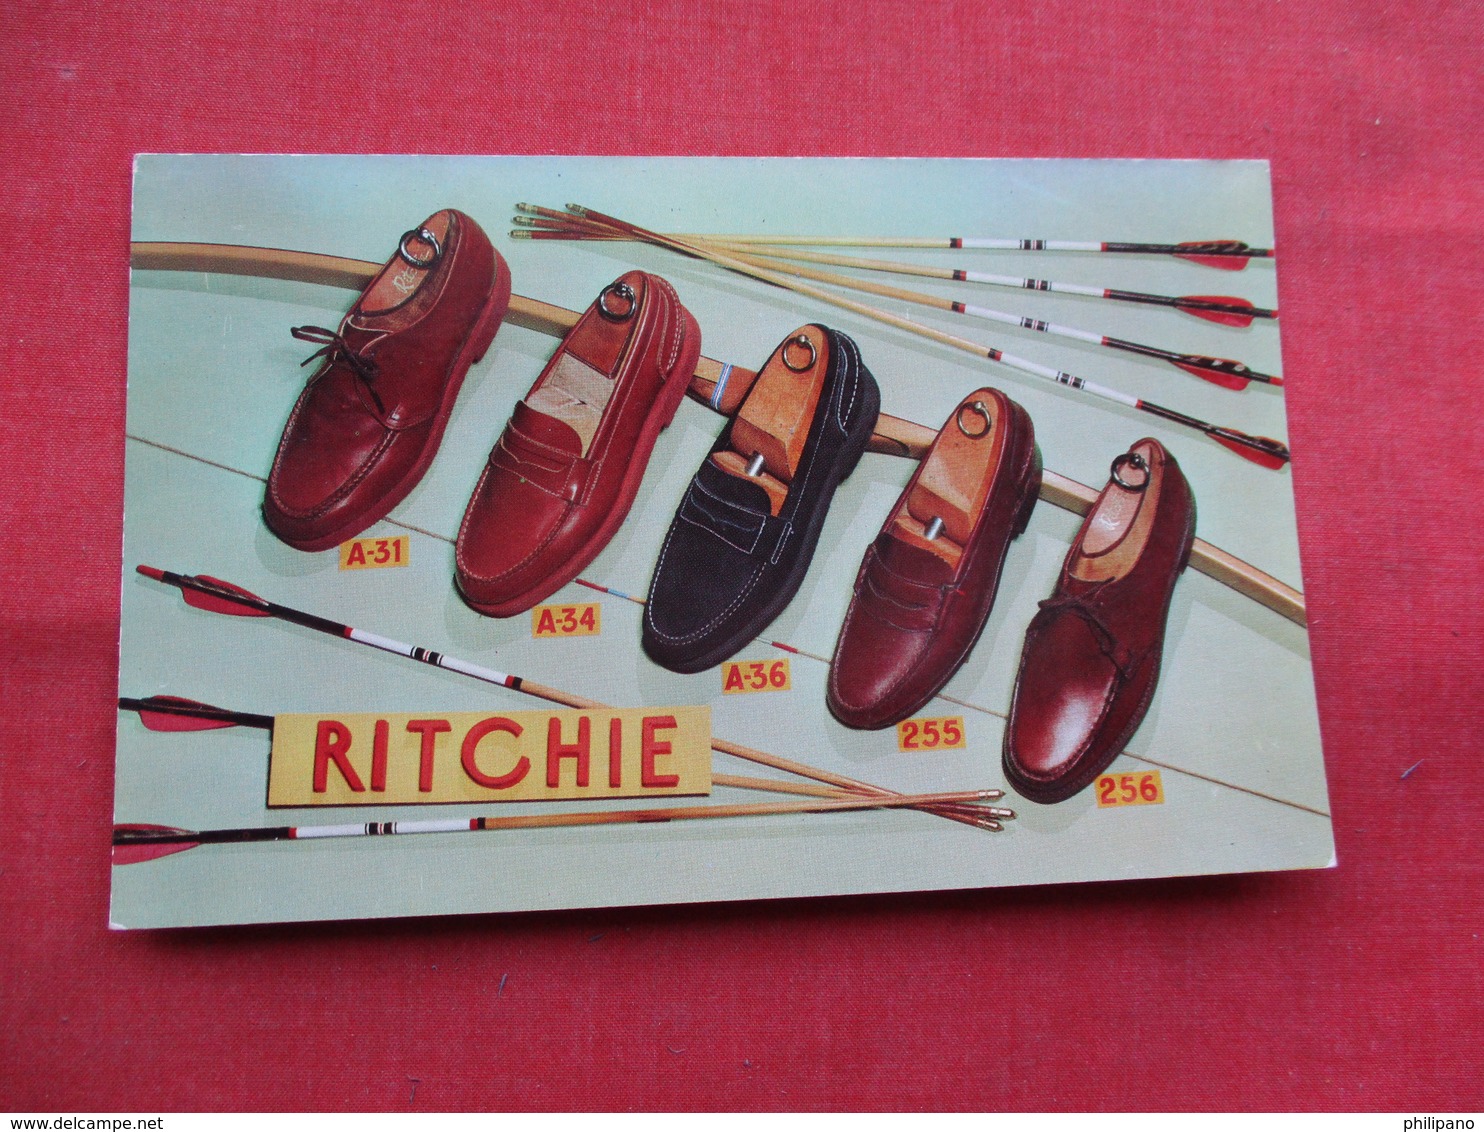 Ritchie Shoes        -ref    3573 - Advertising